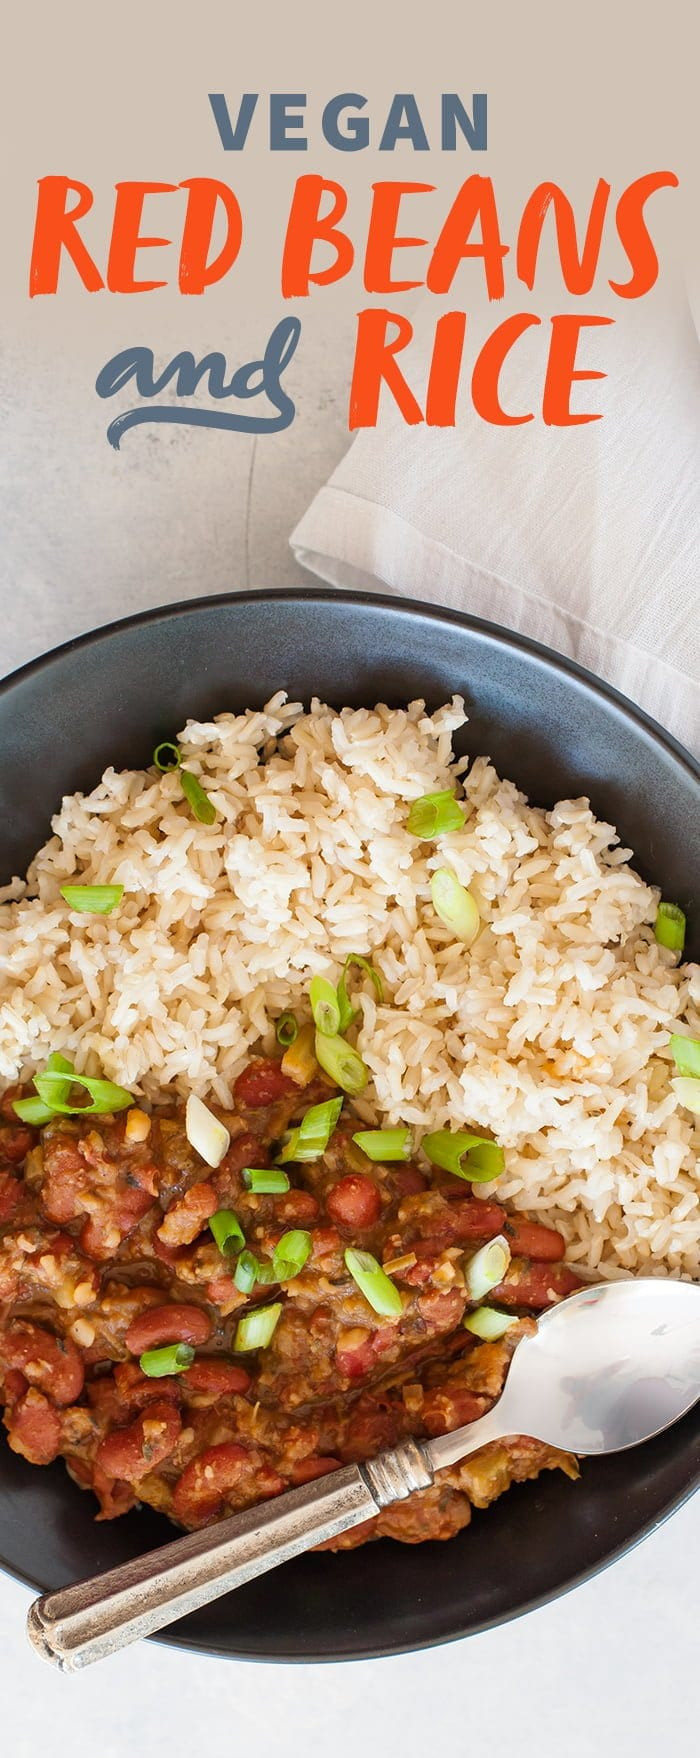 Red Beans And Rice Recipe Vegan
 Vegan Red Beans and Rice